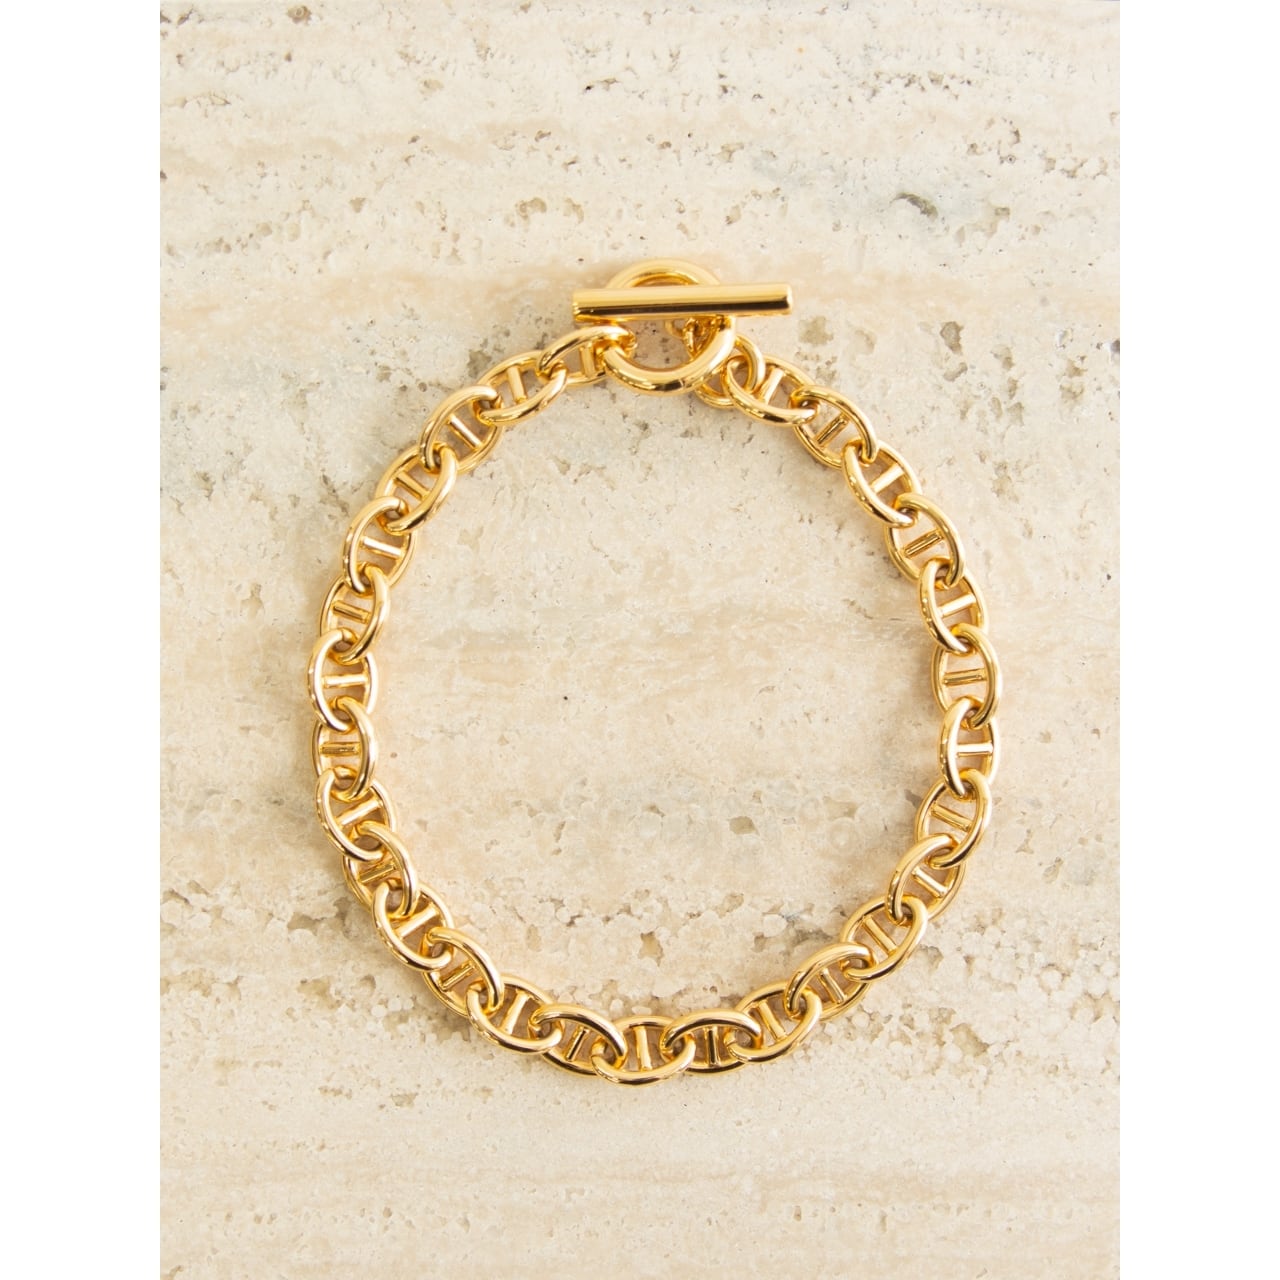 Gucci "Tom Ford"】Made in Italy 1991 Chaine d'ancre Gold Neckless Double  Bracelet（グッチ イタリア製 トムフォード期 シェーヌダンクル ゴールドネックレス ブレスレット ） | MASCOT/E